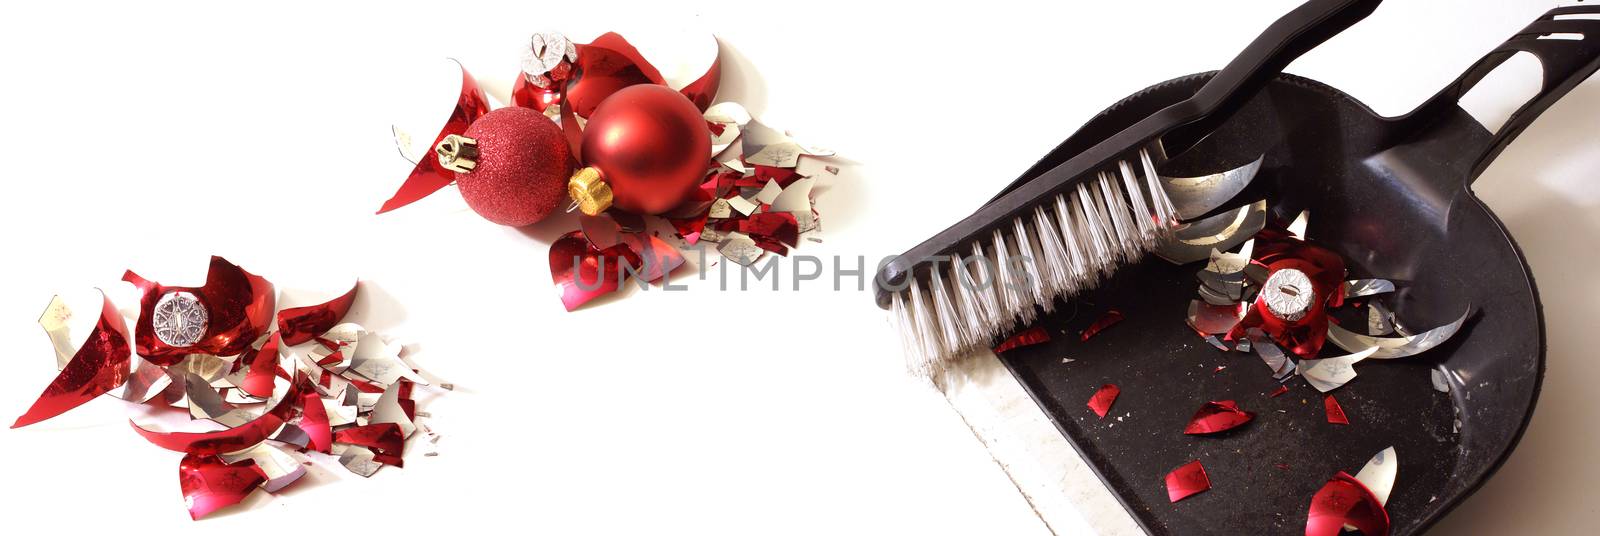 A smashed red holiday bauble has fallen to many pieces so a broom and dustpan come to clean up the mess.